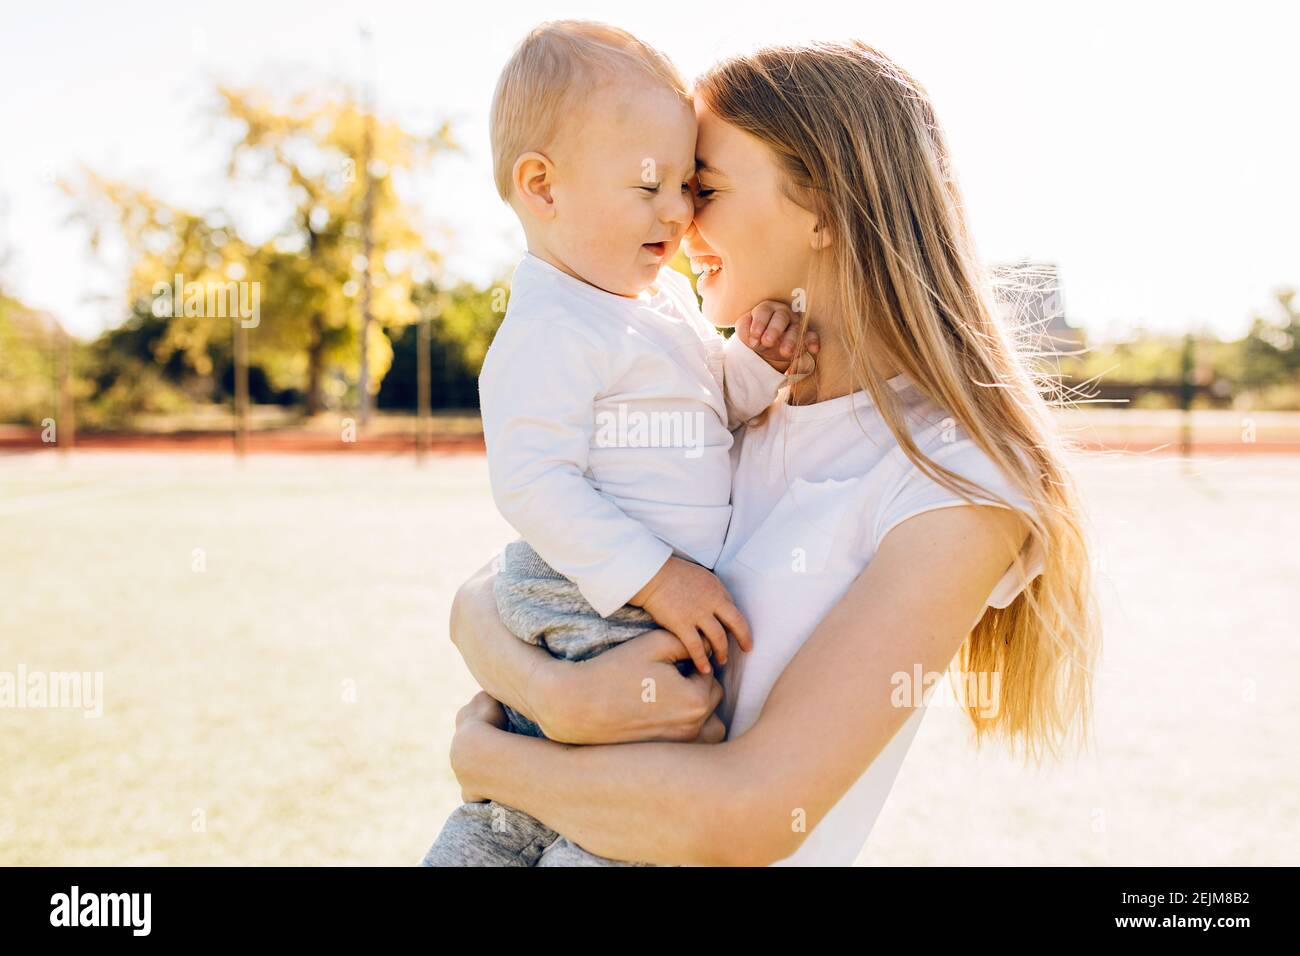 Caring young mother with her baby, loving mom hugs little child, enjoying tender family moment outdoors on a sunny day, Mother's Day Stock Photo